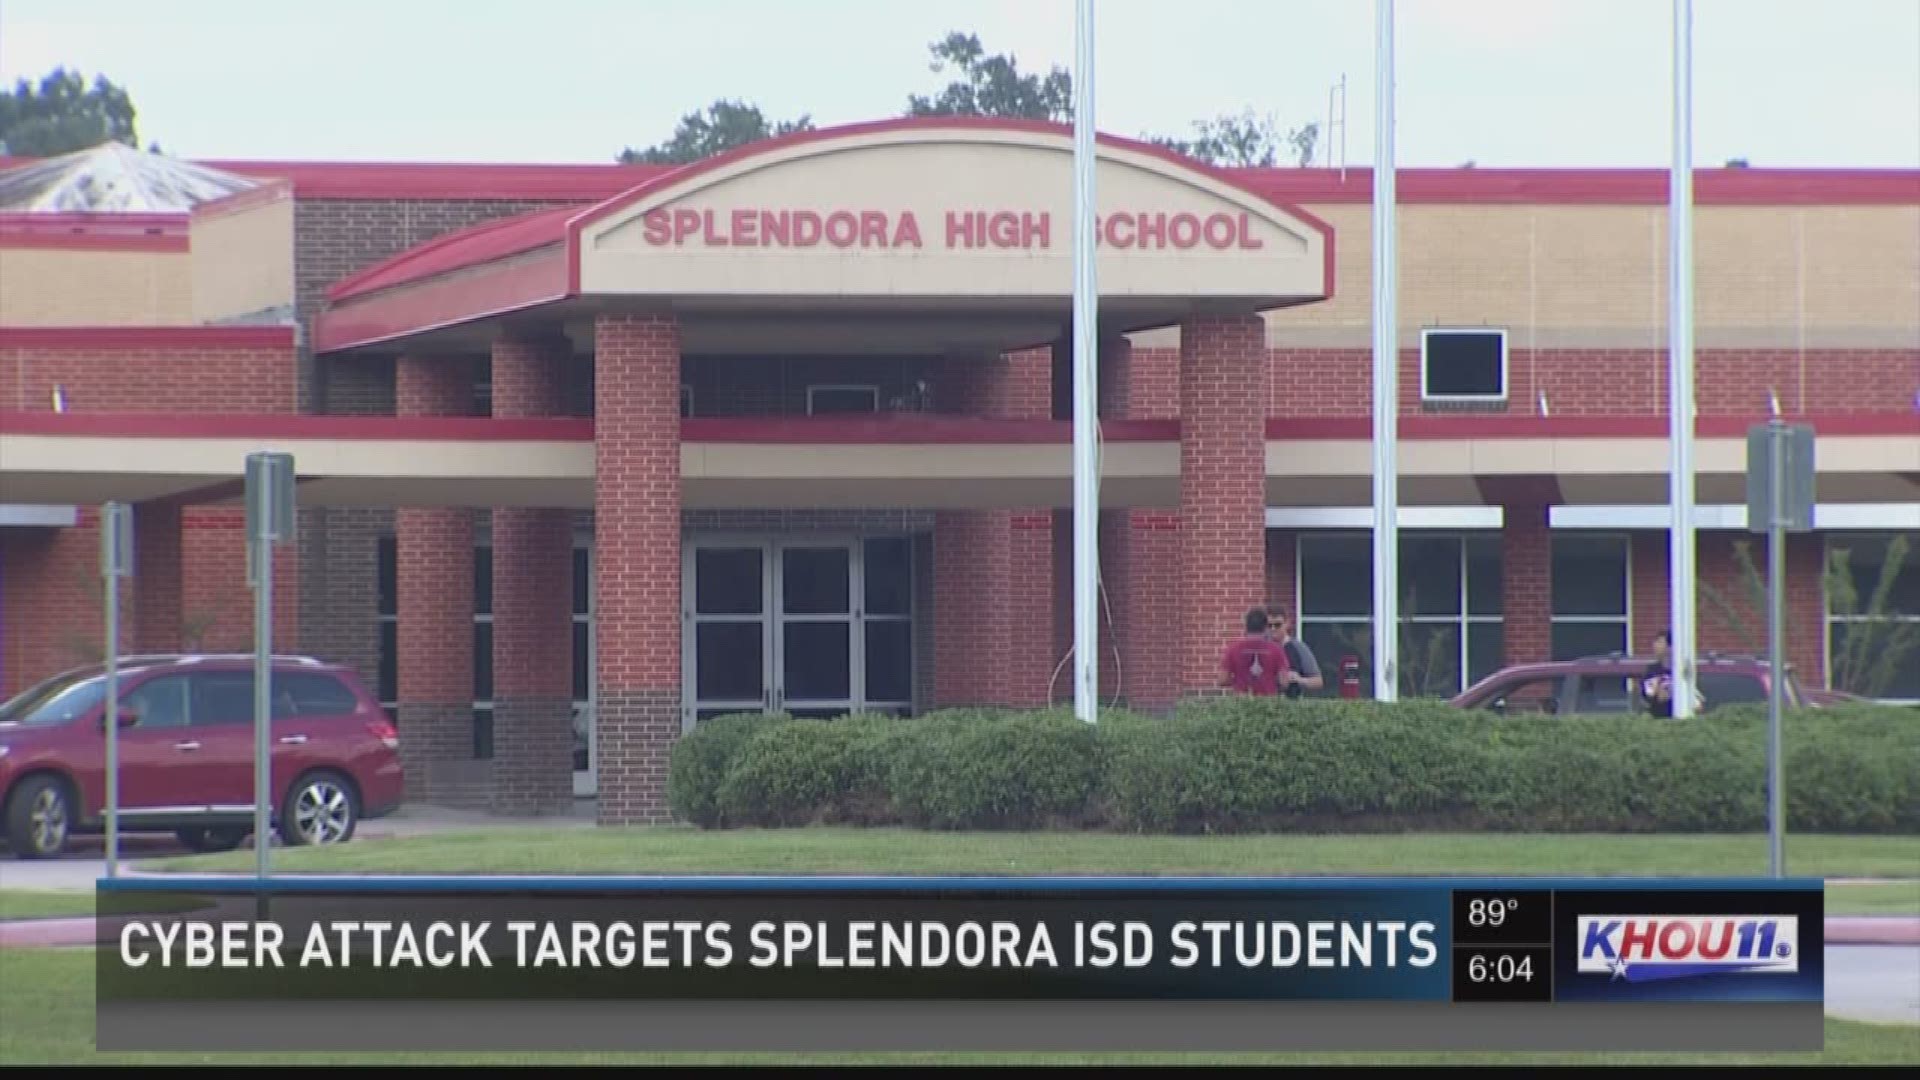 Officials with the Splendora Independent School District say hackers have cracked their computer network and accessed the personal information of students.